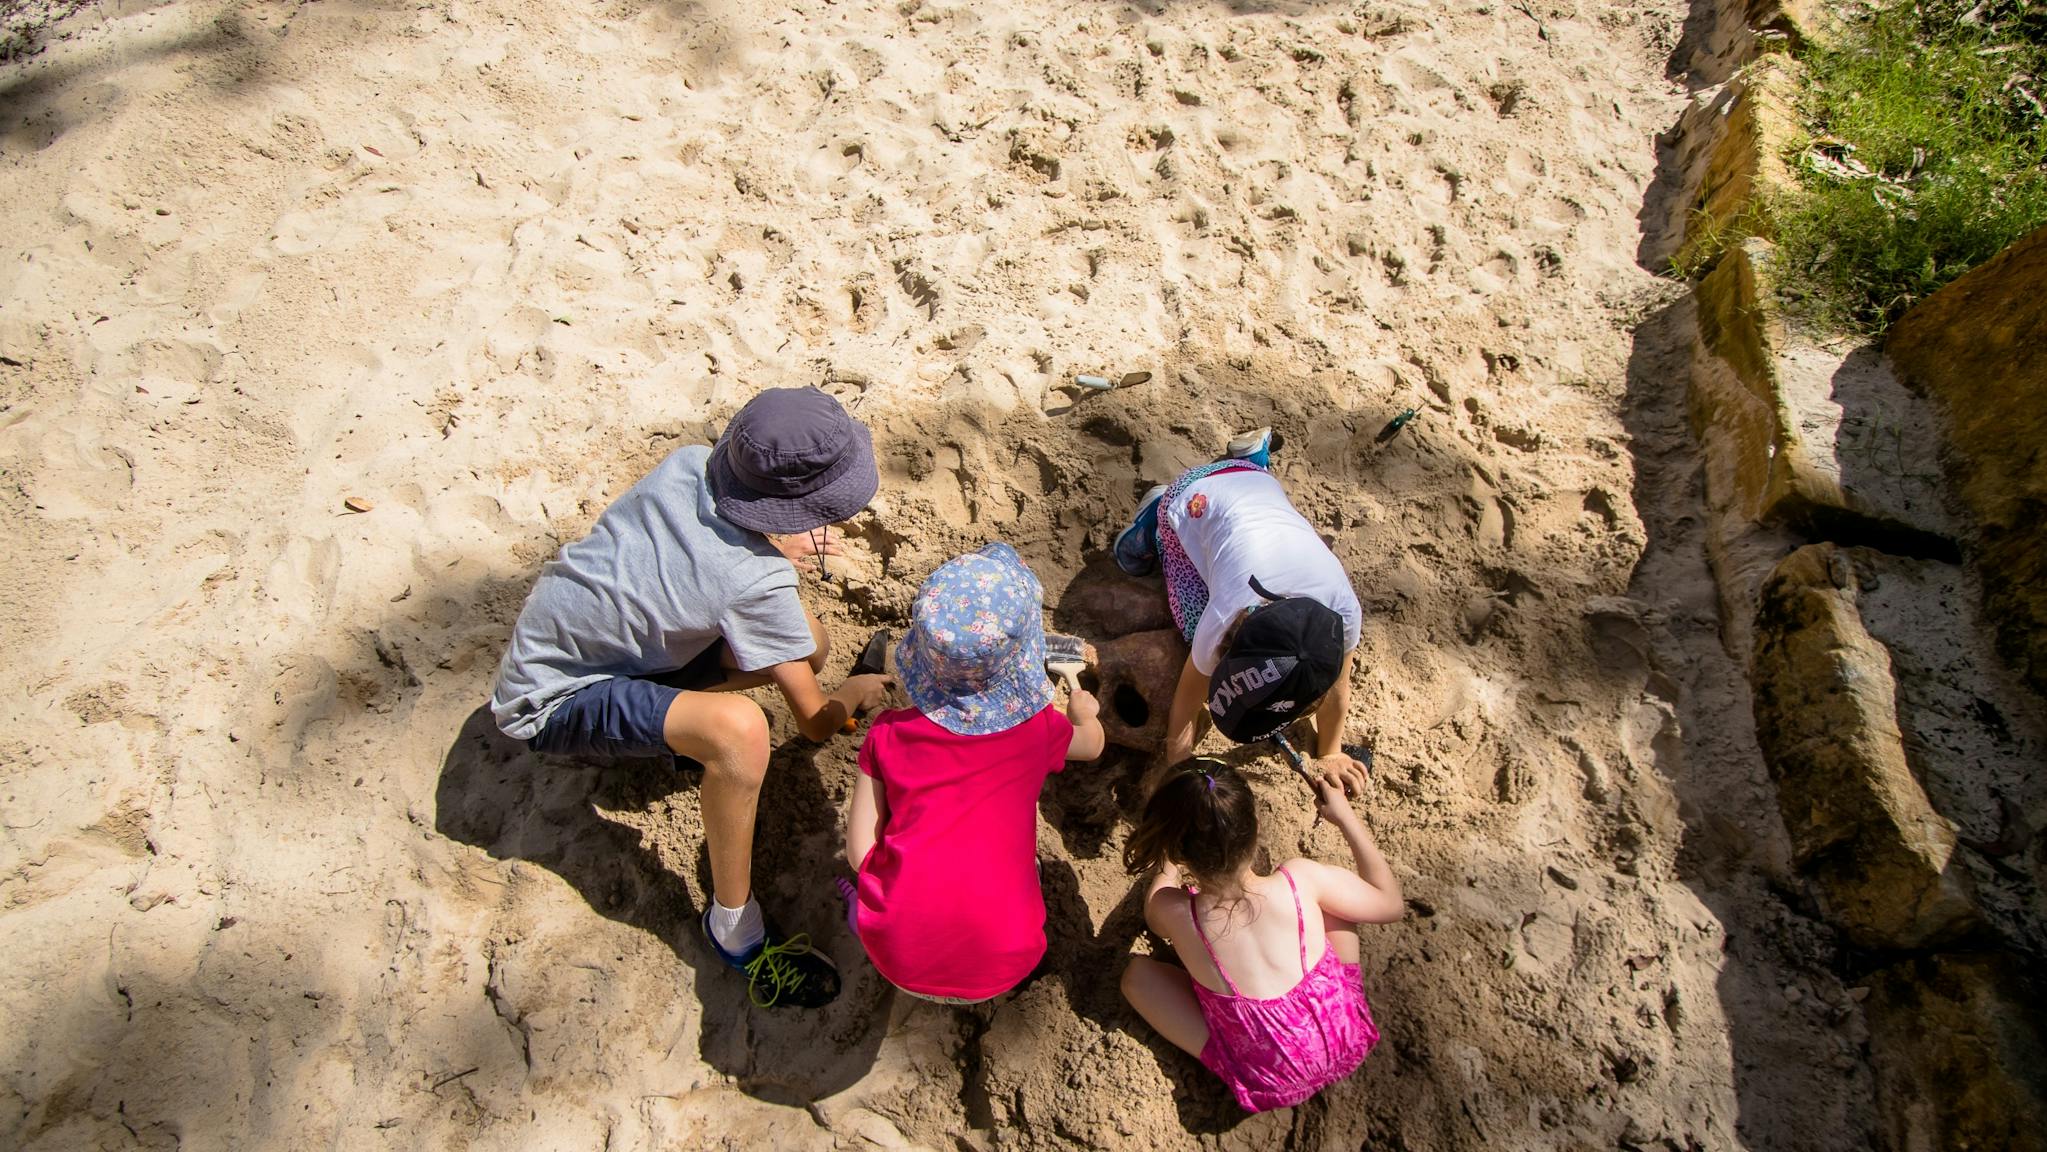 Four kids, three girls and one boy, are digging together for fossils in a large sand pit.